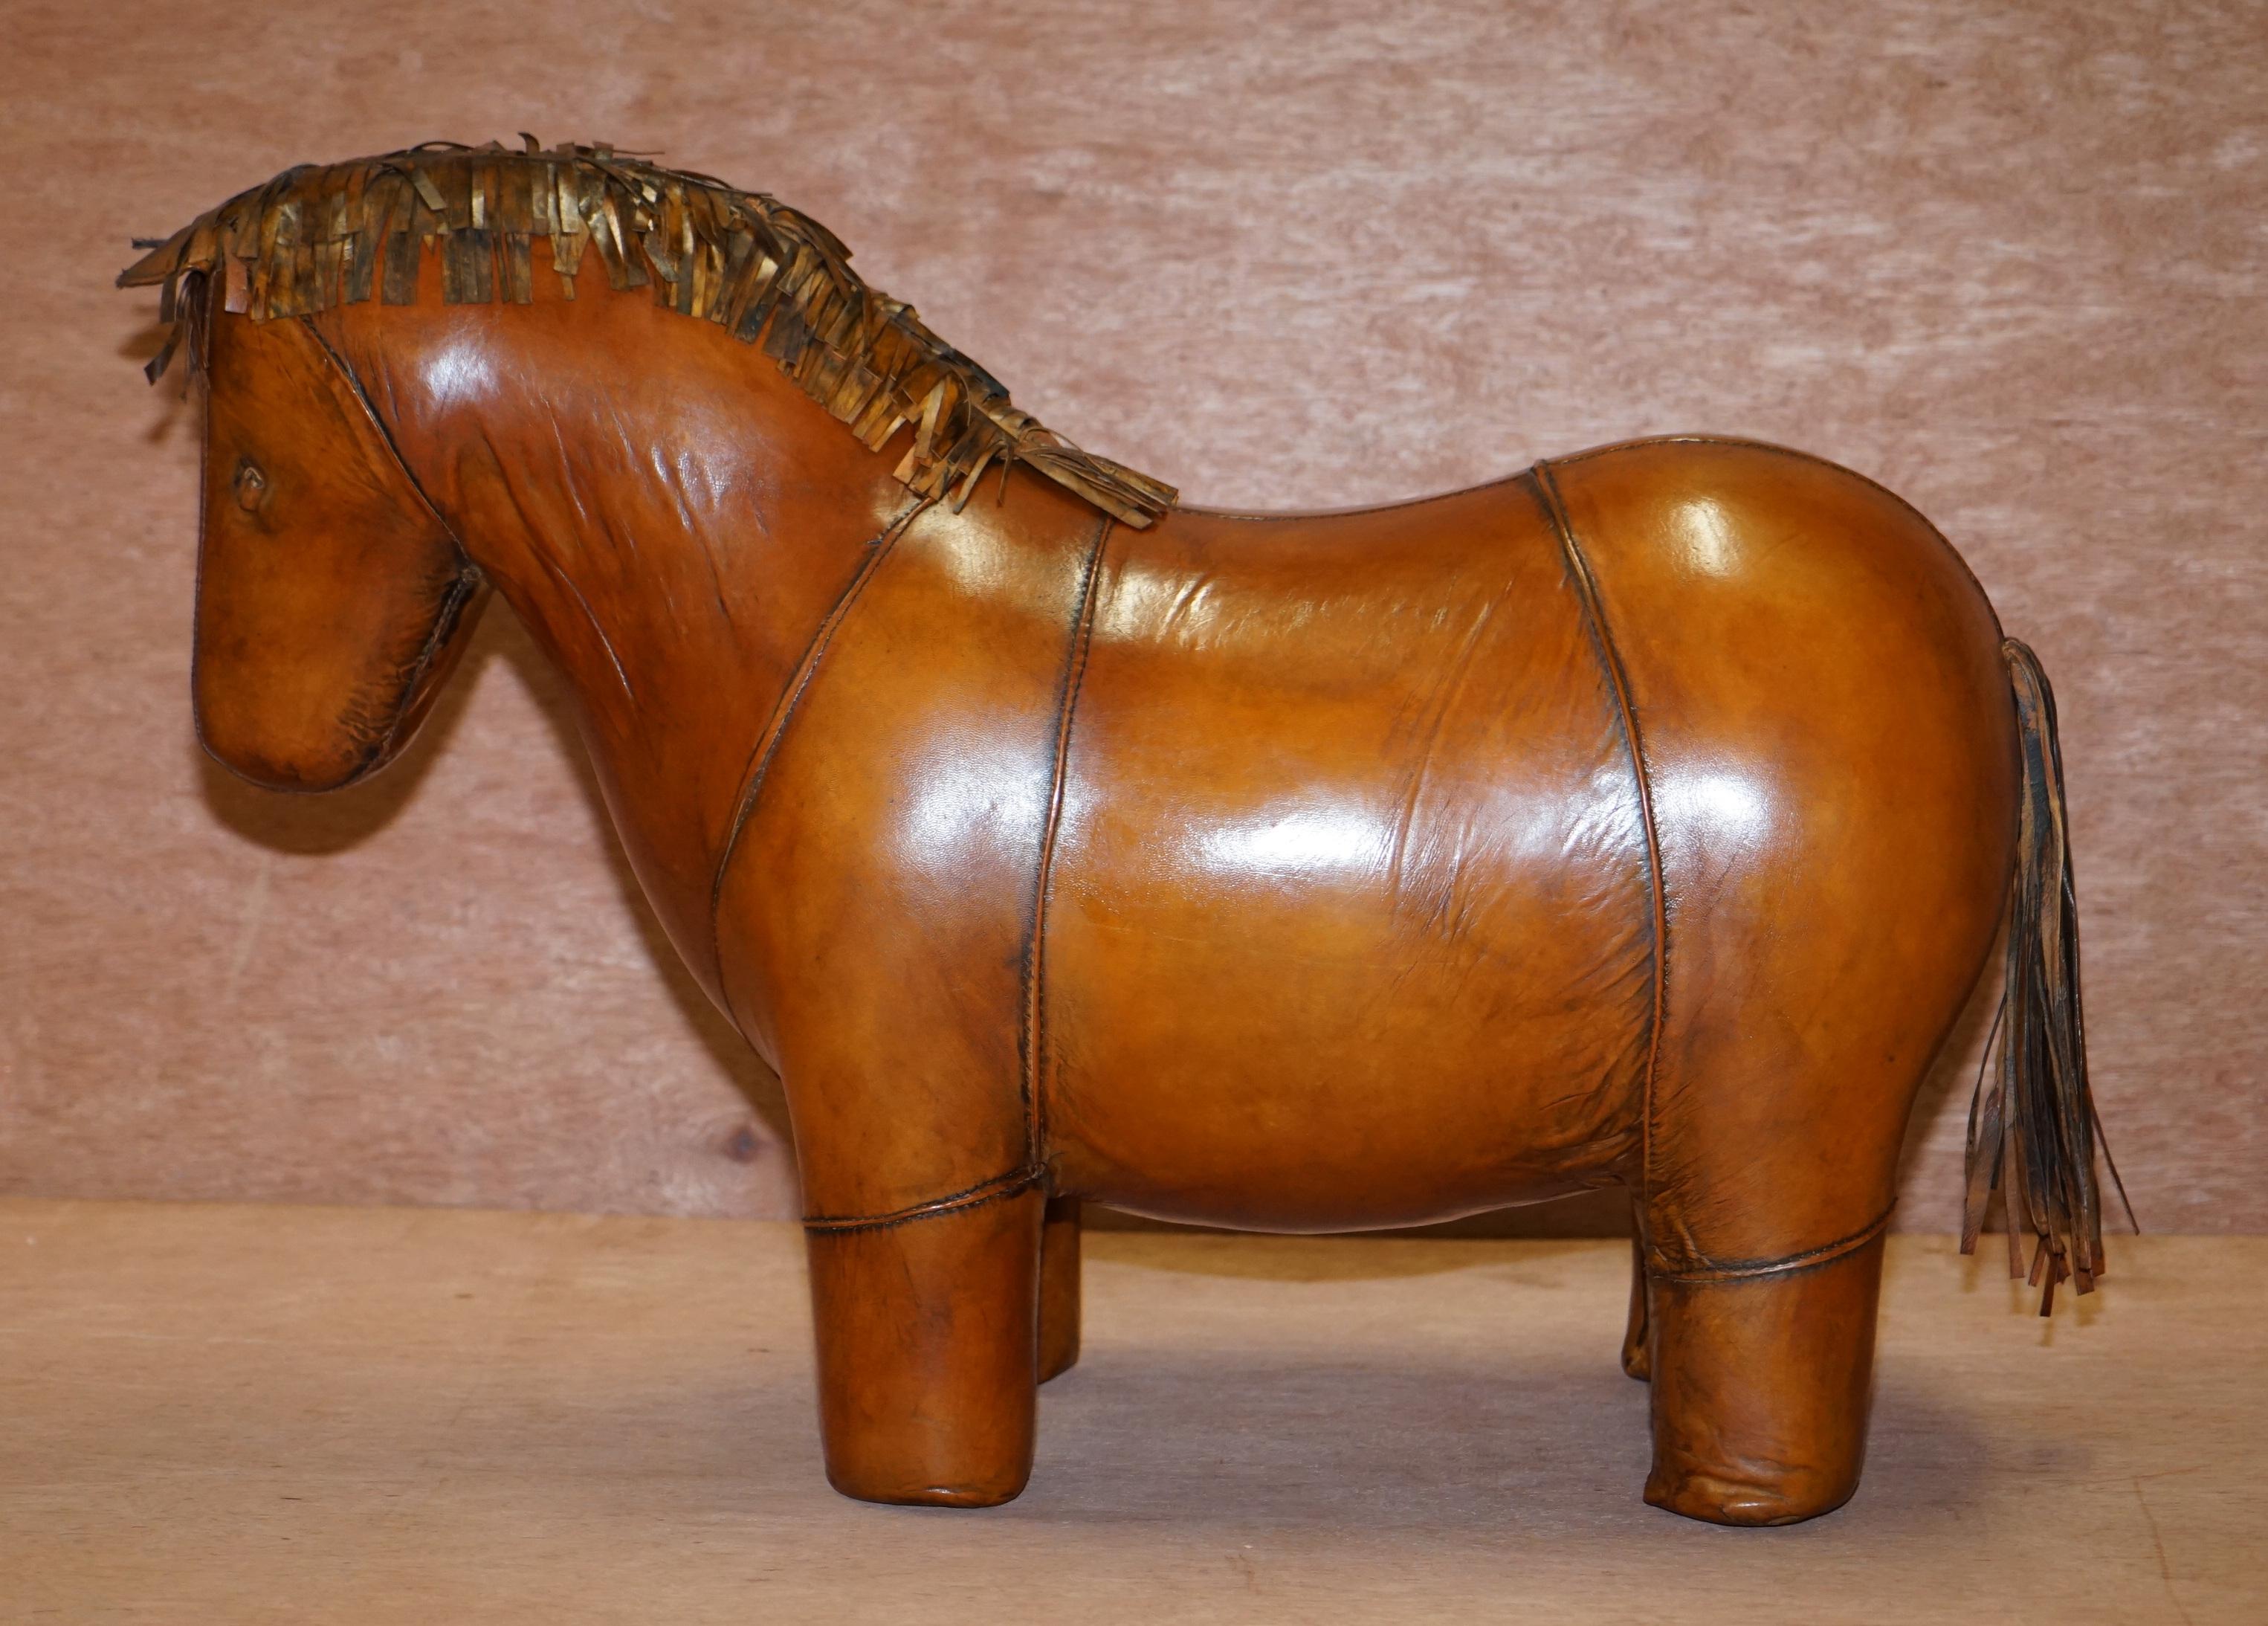 We are delighted to offer for sale 1 of 2 new old stock Vintage Liberty’s London Omersa style brown leather horse or pony footstools

This sale is for one with the option to buy two.

These were made in varying sizes, this is a large